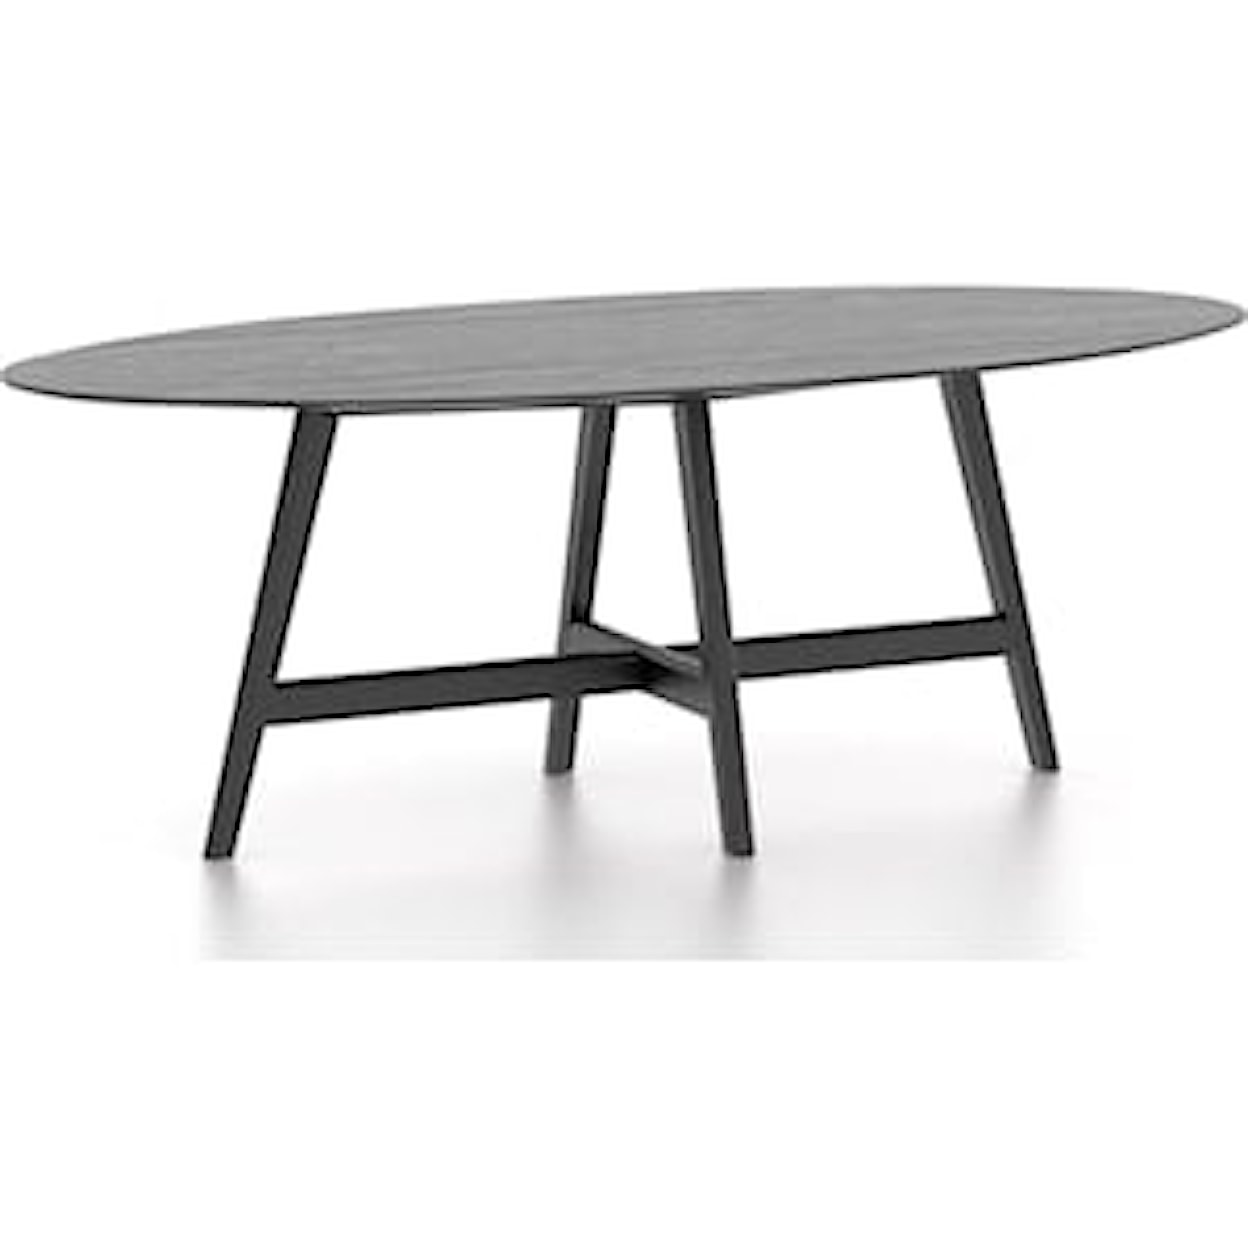 Canadel Downtown Oval wood table